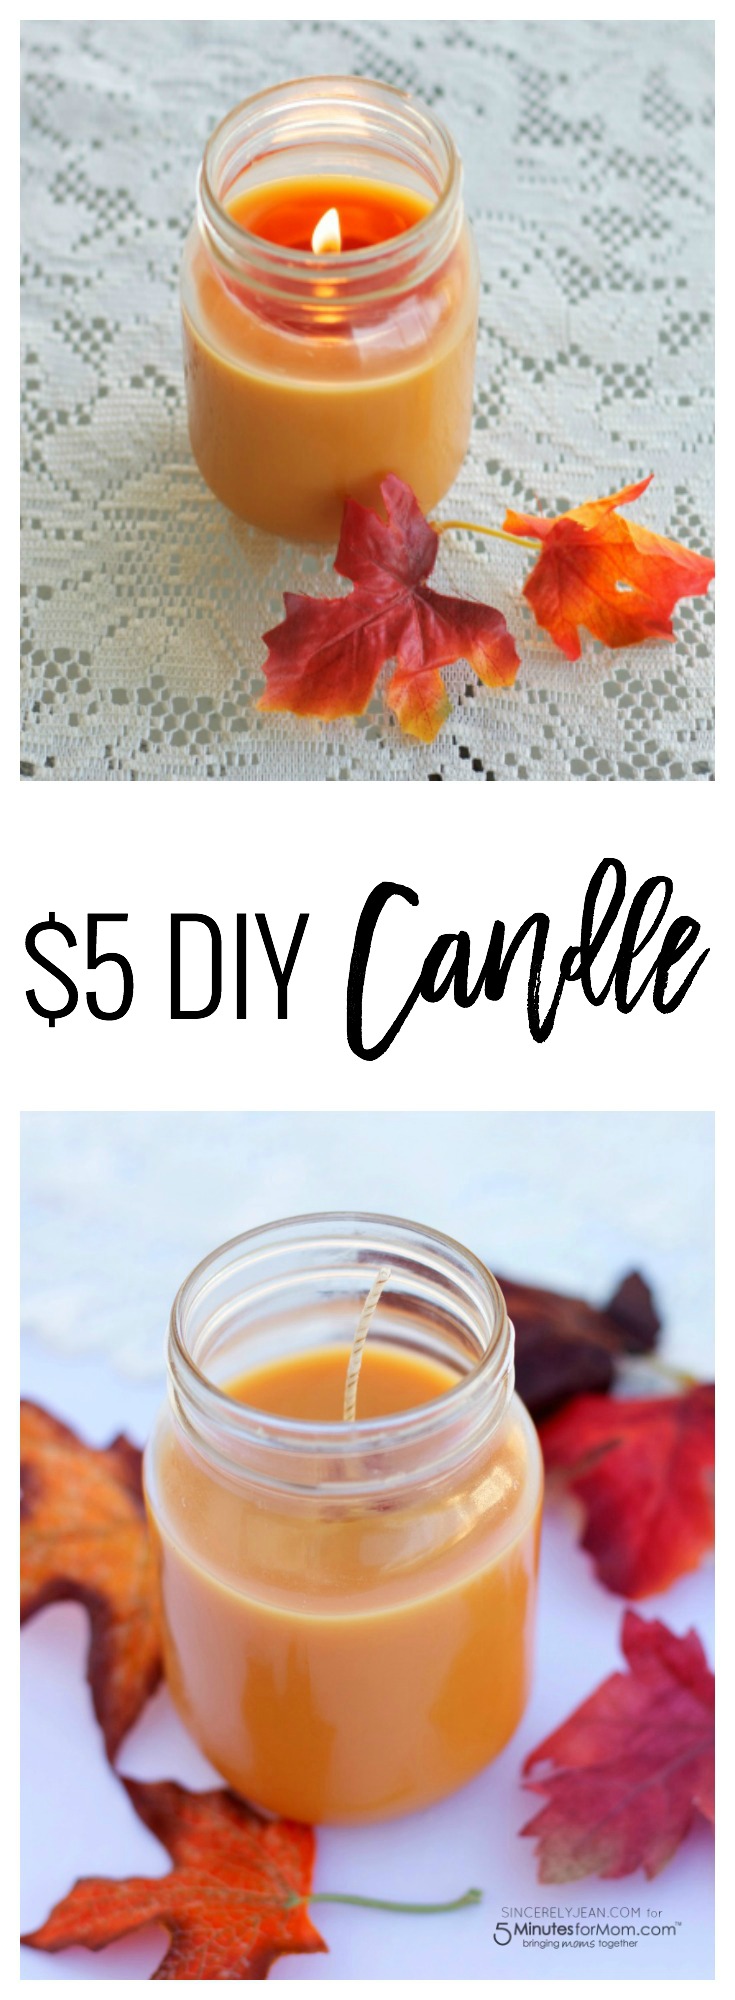 Homemade/DIY candle that is inexpensive and uses shortening! By SincerelyJean.com